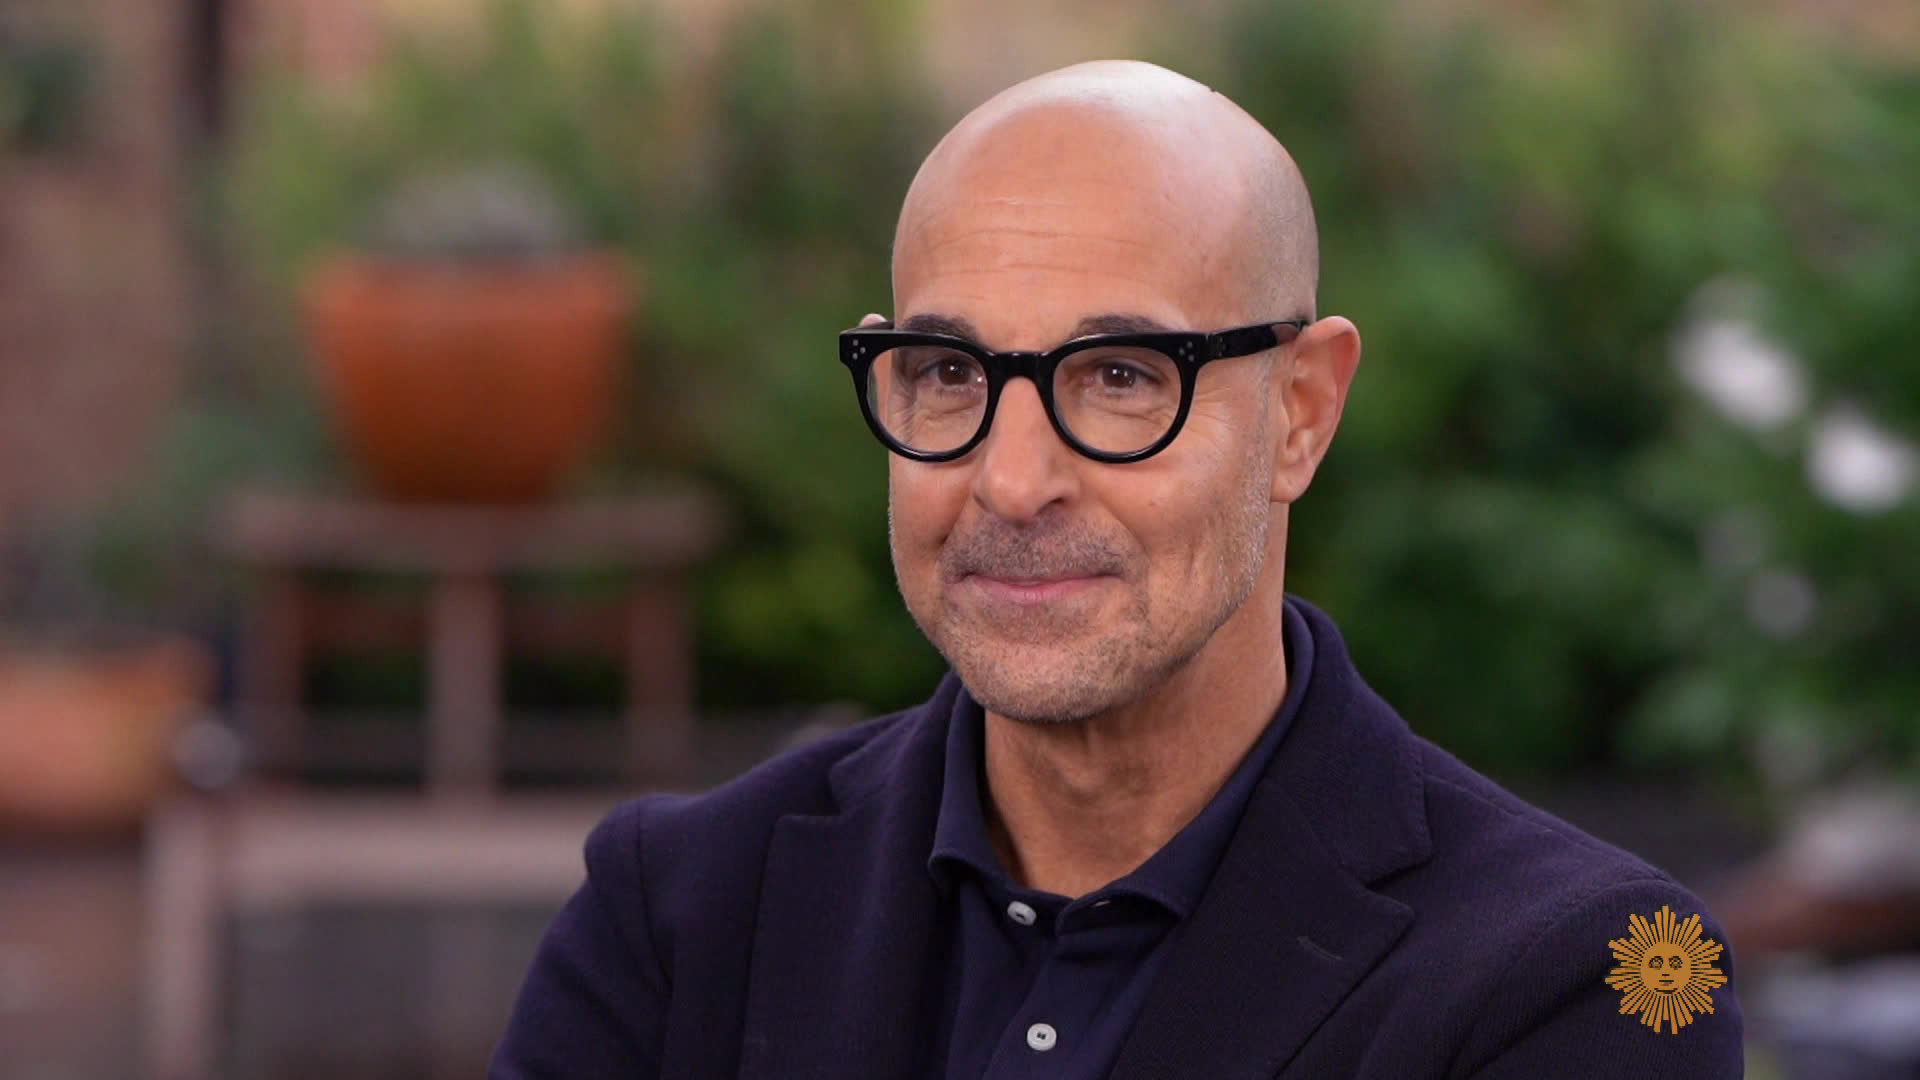 Watch Sunday Morning In Conversation Stanley Tucci Full show on CBS